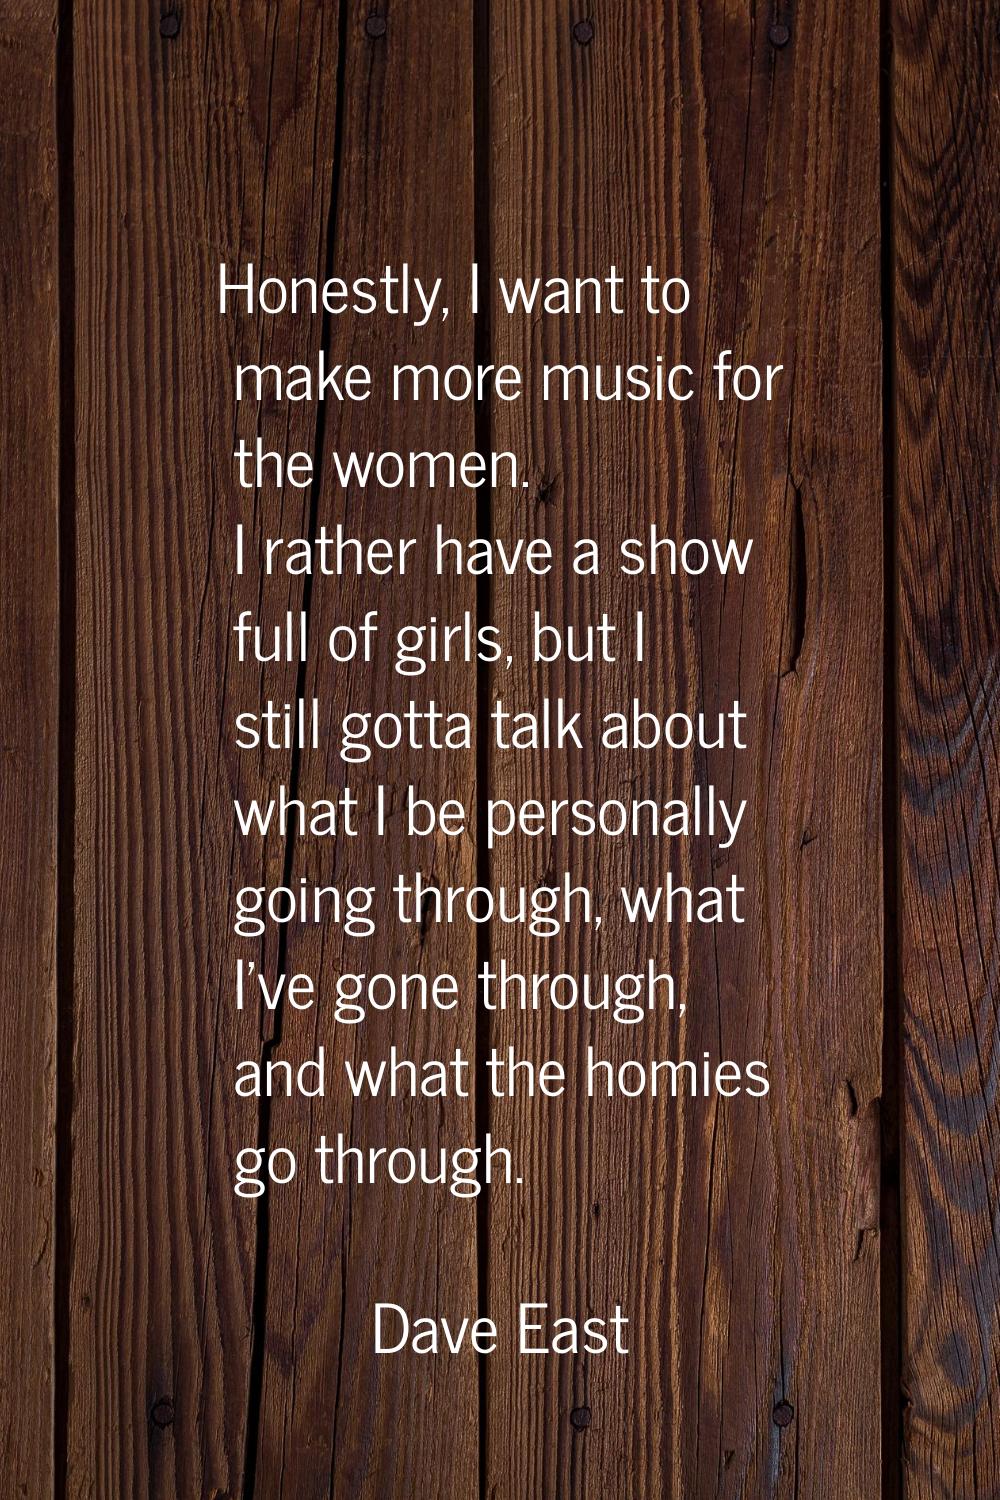 Honestly, I want to make more music for the women. I rather have a show full of girls, but I still 